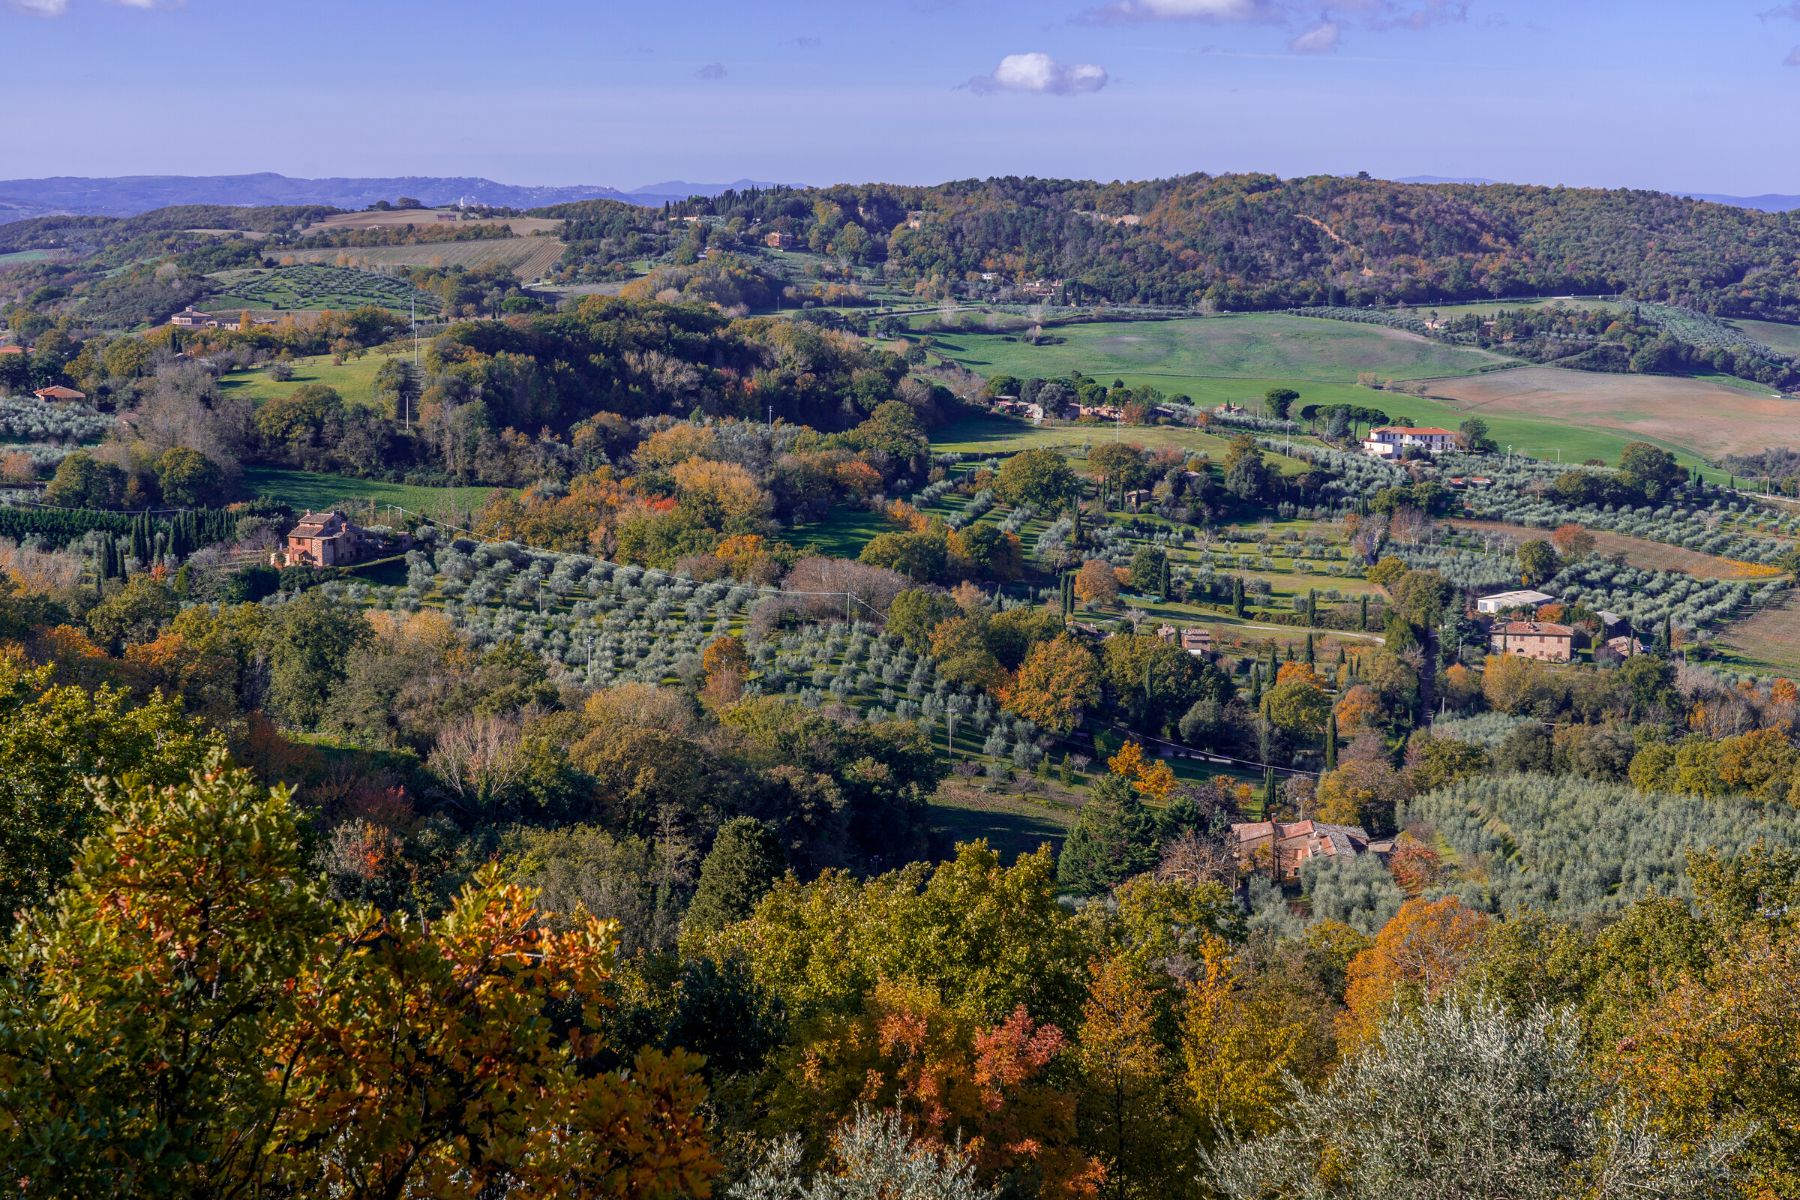 The Montepulciano countryside